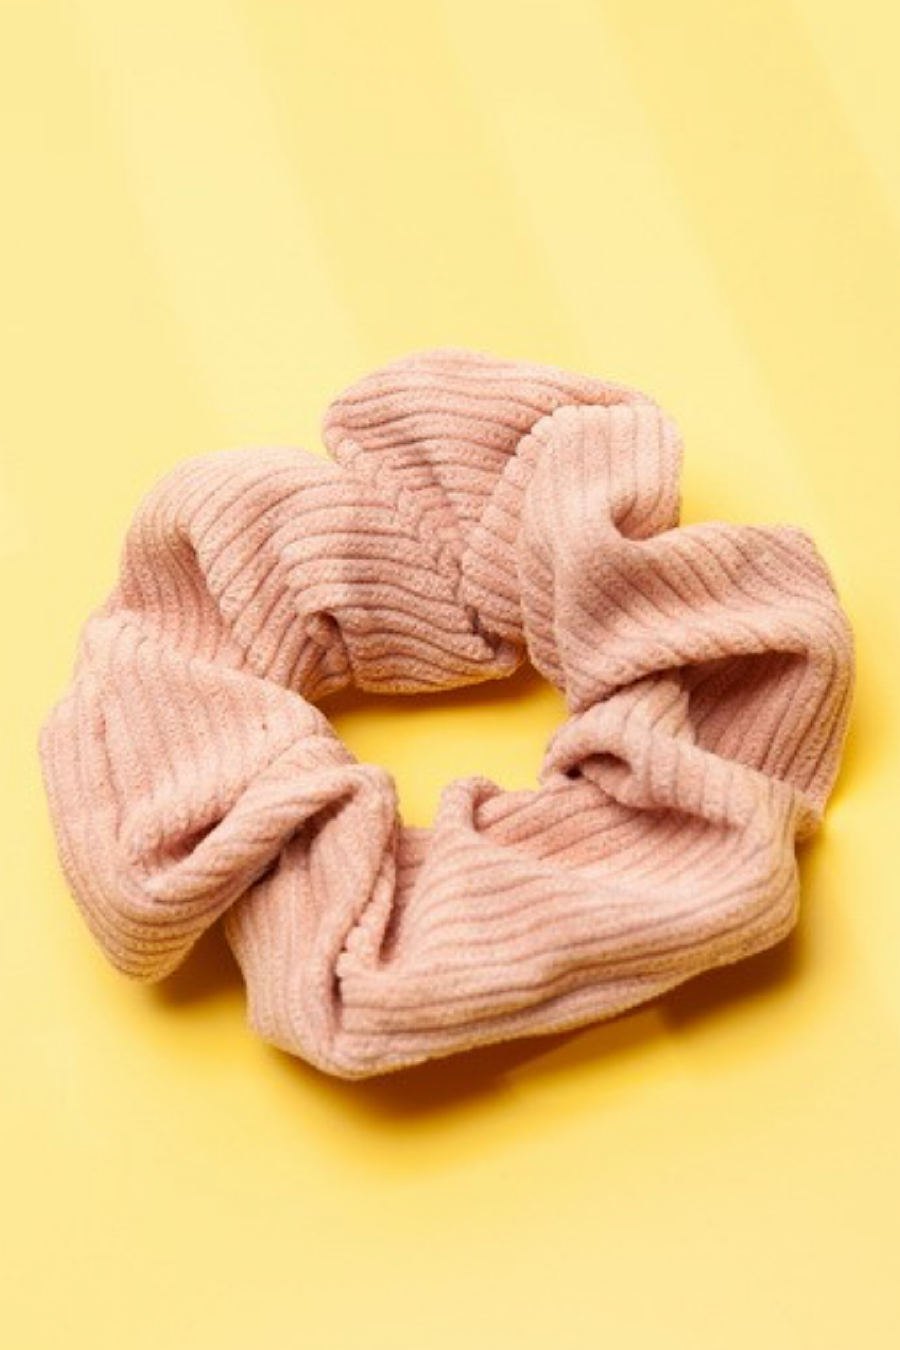 Corduroy Scrunchies in Several Colors